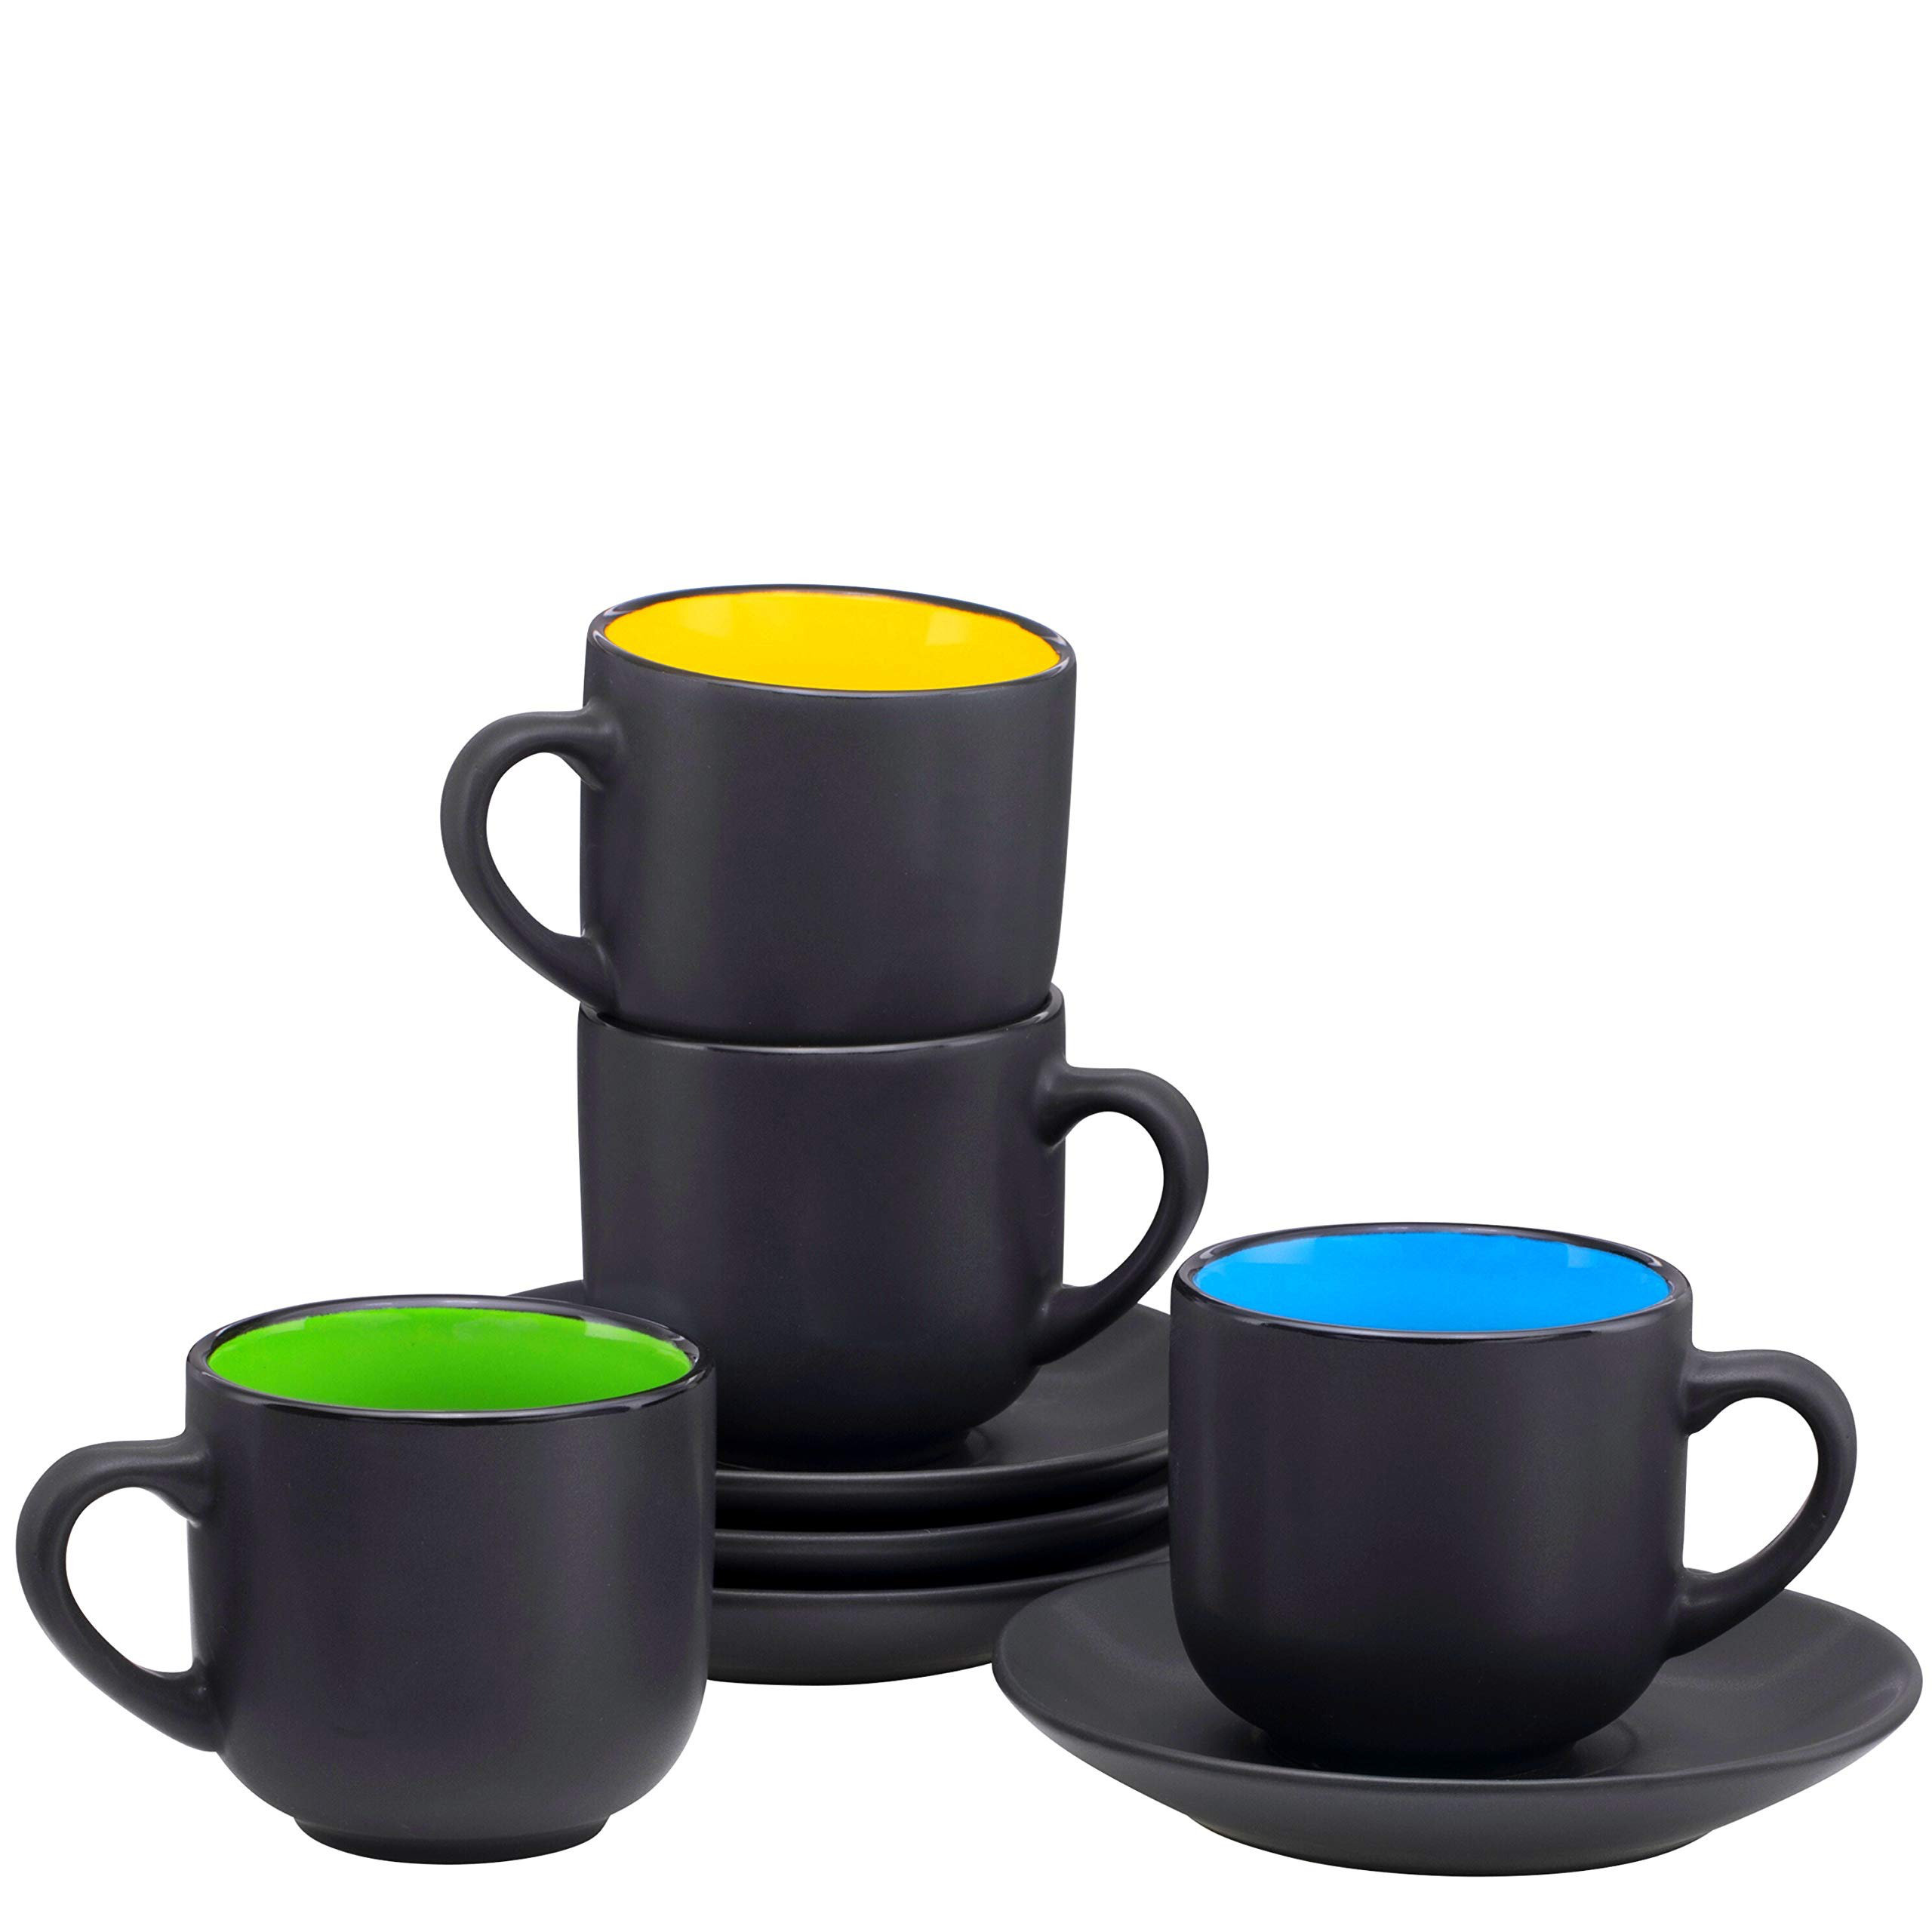 Corrigan Studio Christmas Gift Choice: Espresso Cups and Saucers Set of 4. Small 4 Ounce Stackable Espresso Cups with Rack. Stacking Espresso Coffee